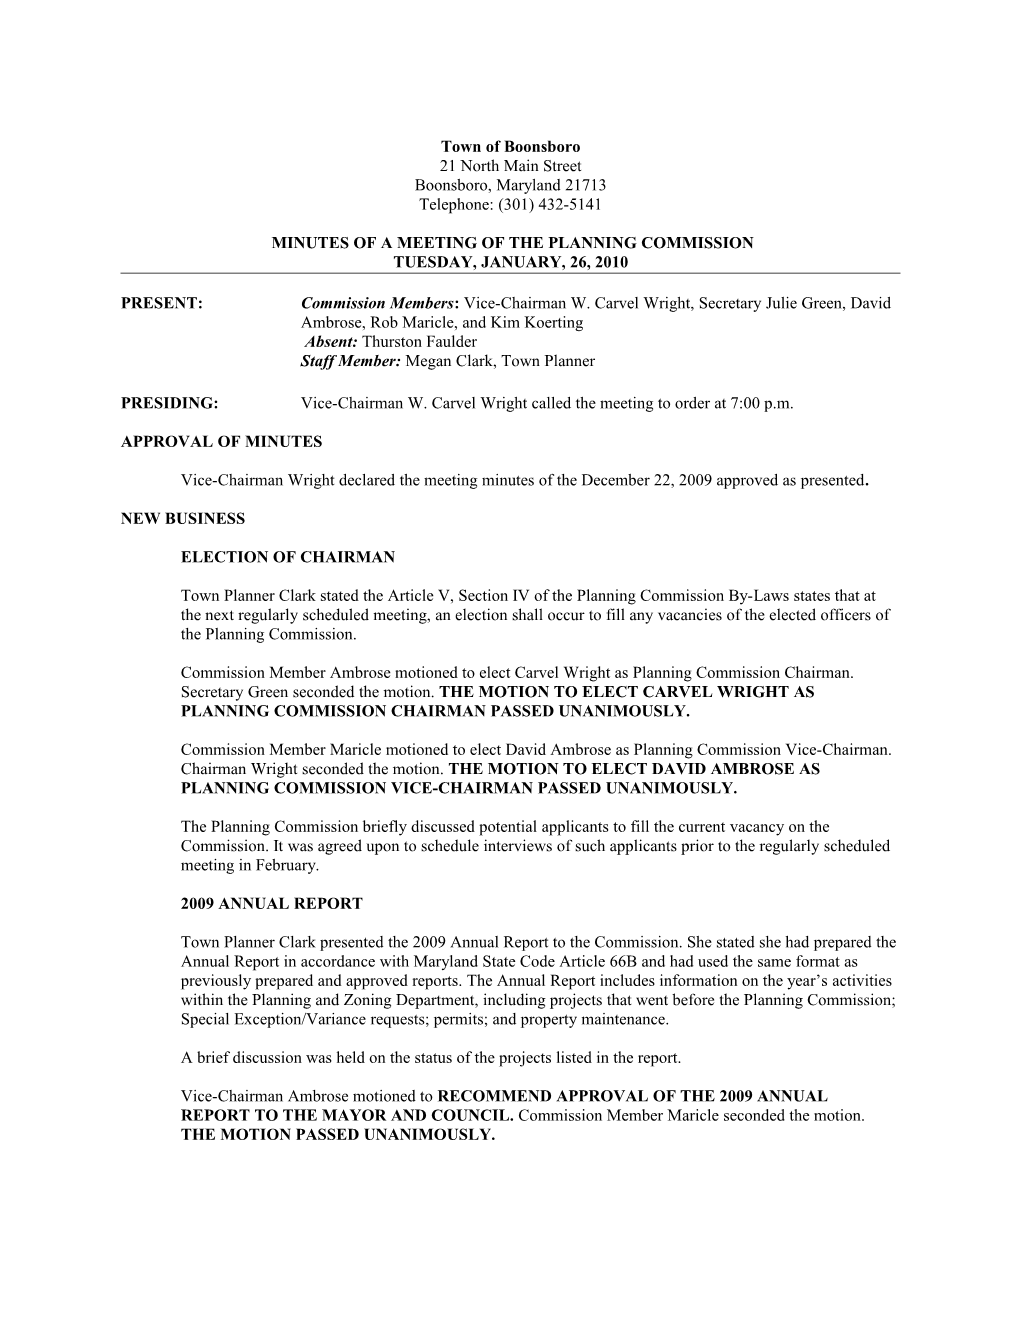 Boonsboro Planning Commission Minutes